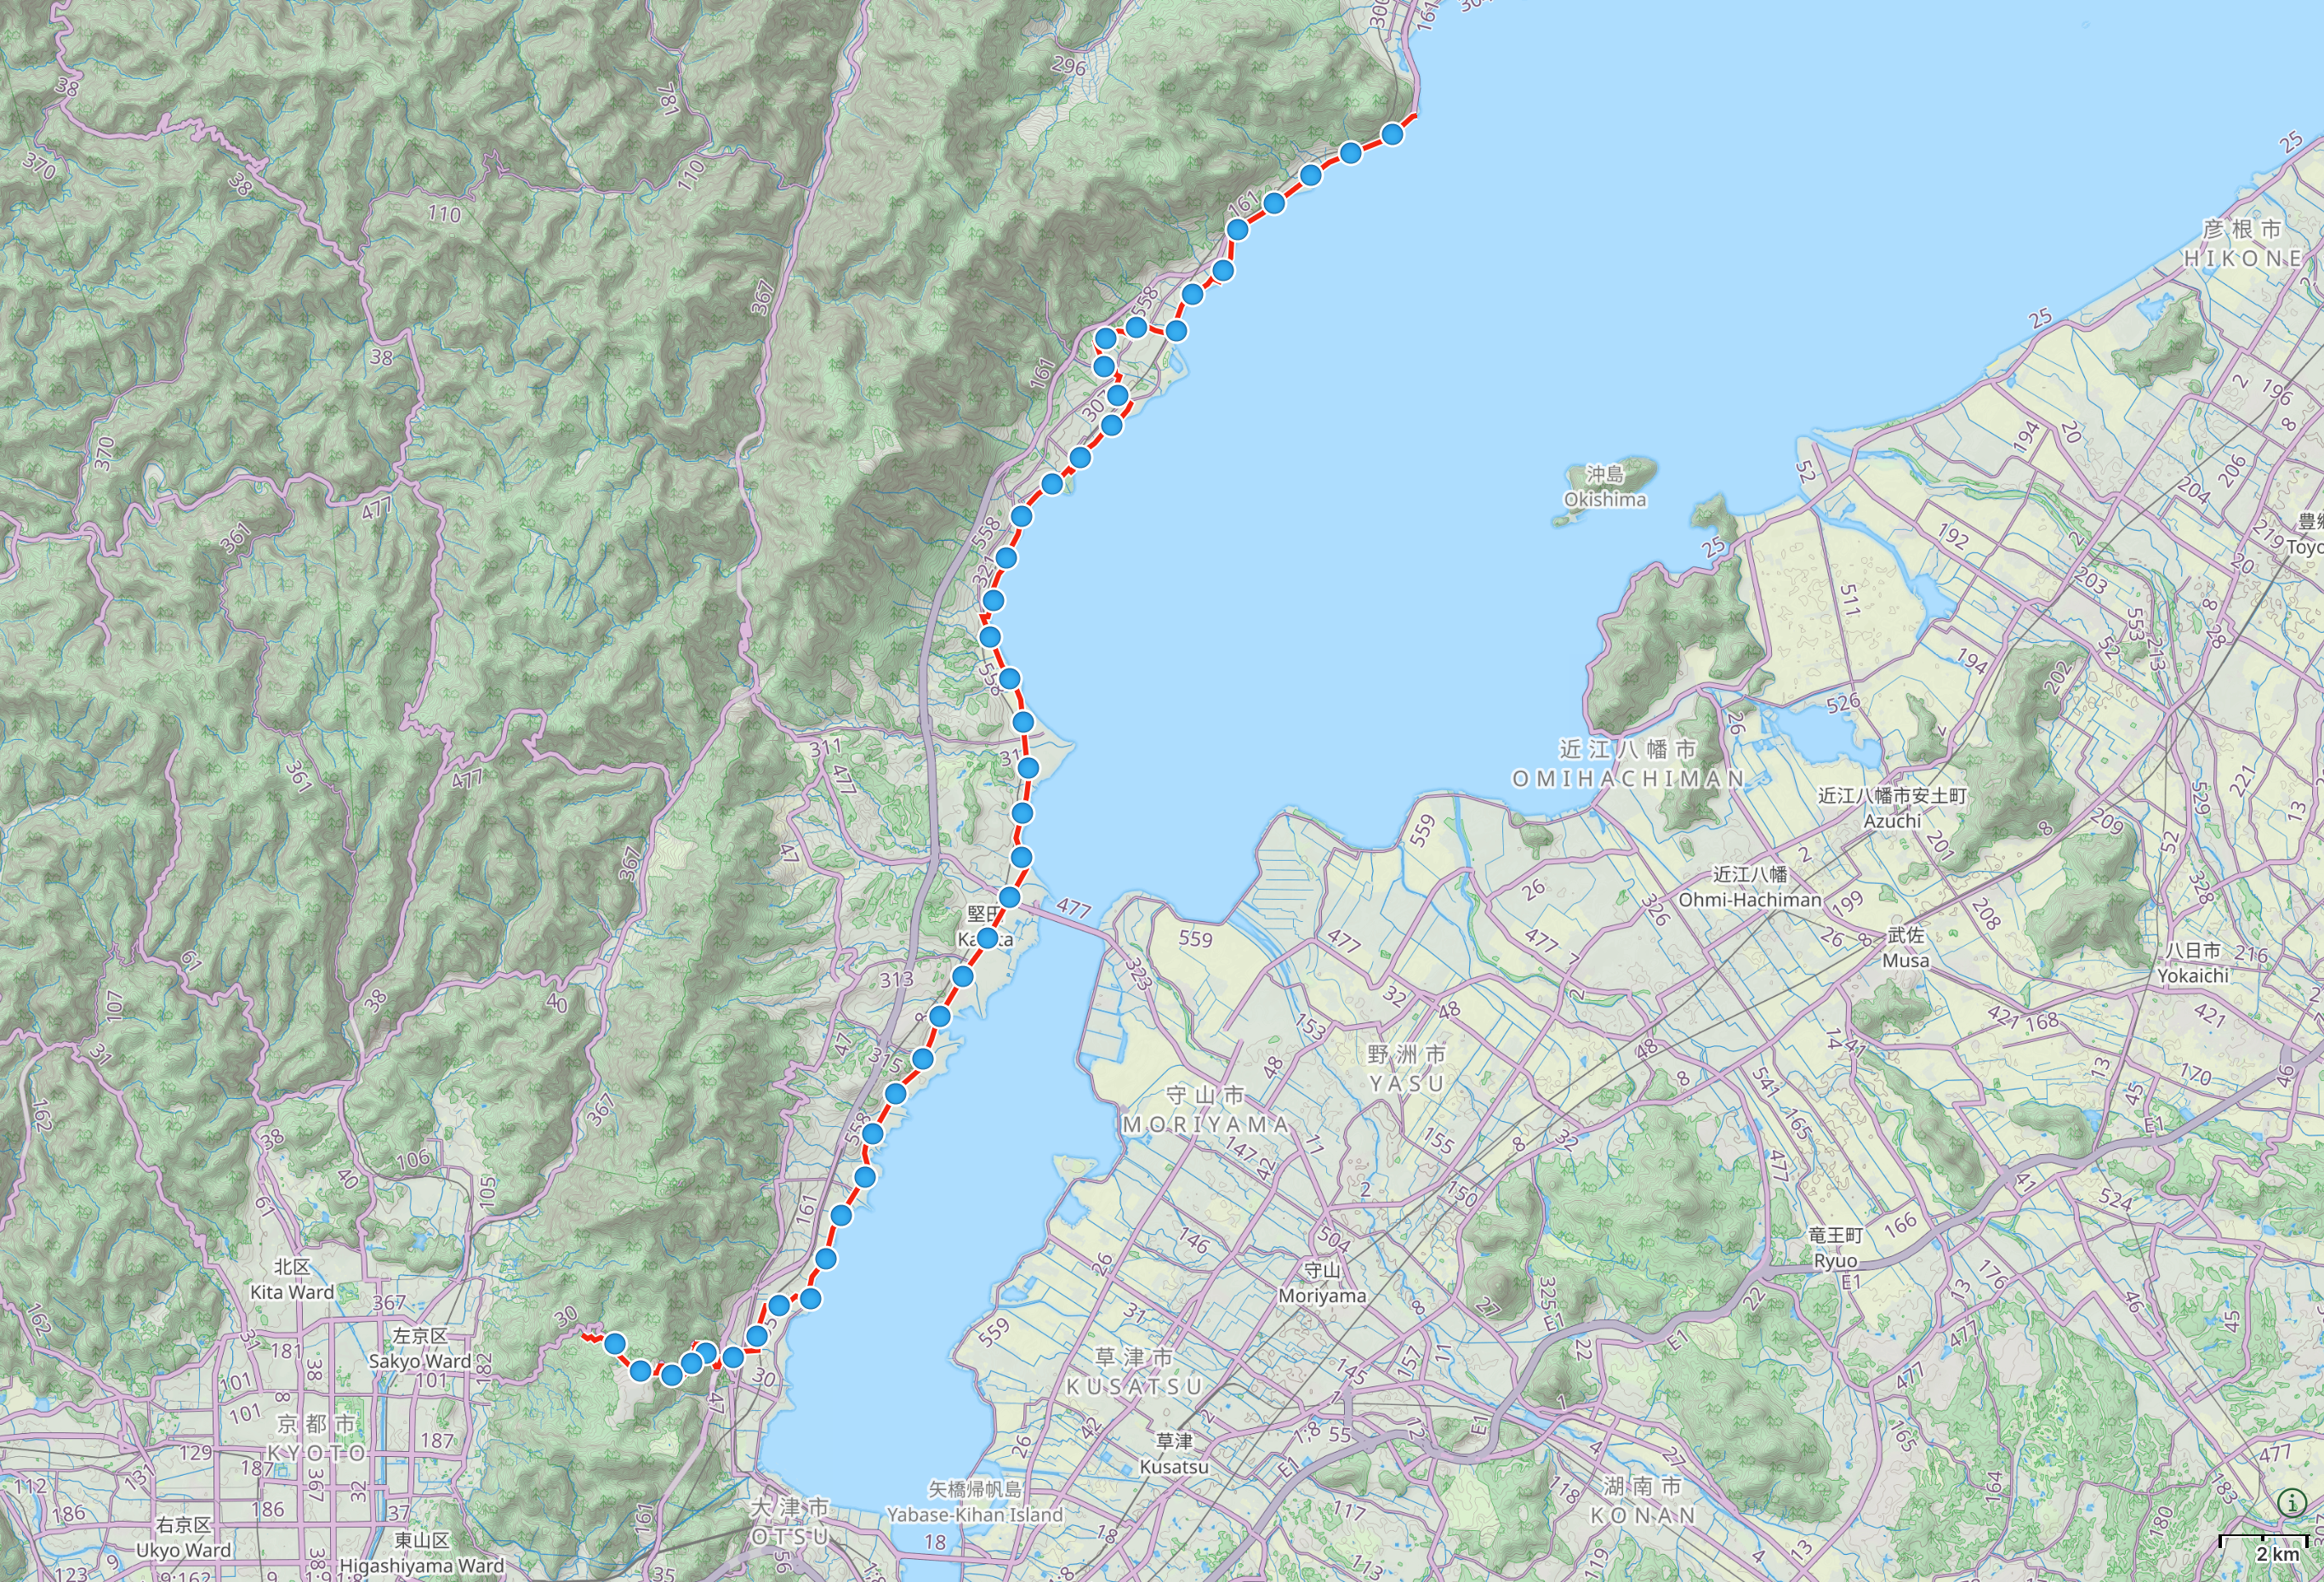 Map of the Lake Biwa area with author’s route between Otsu, Shiga and Shirahige Shrine highlighted.